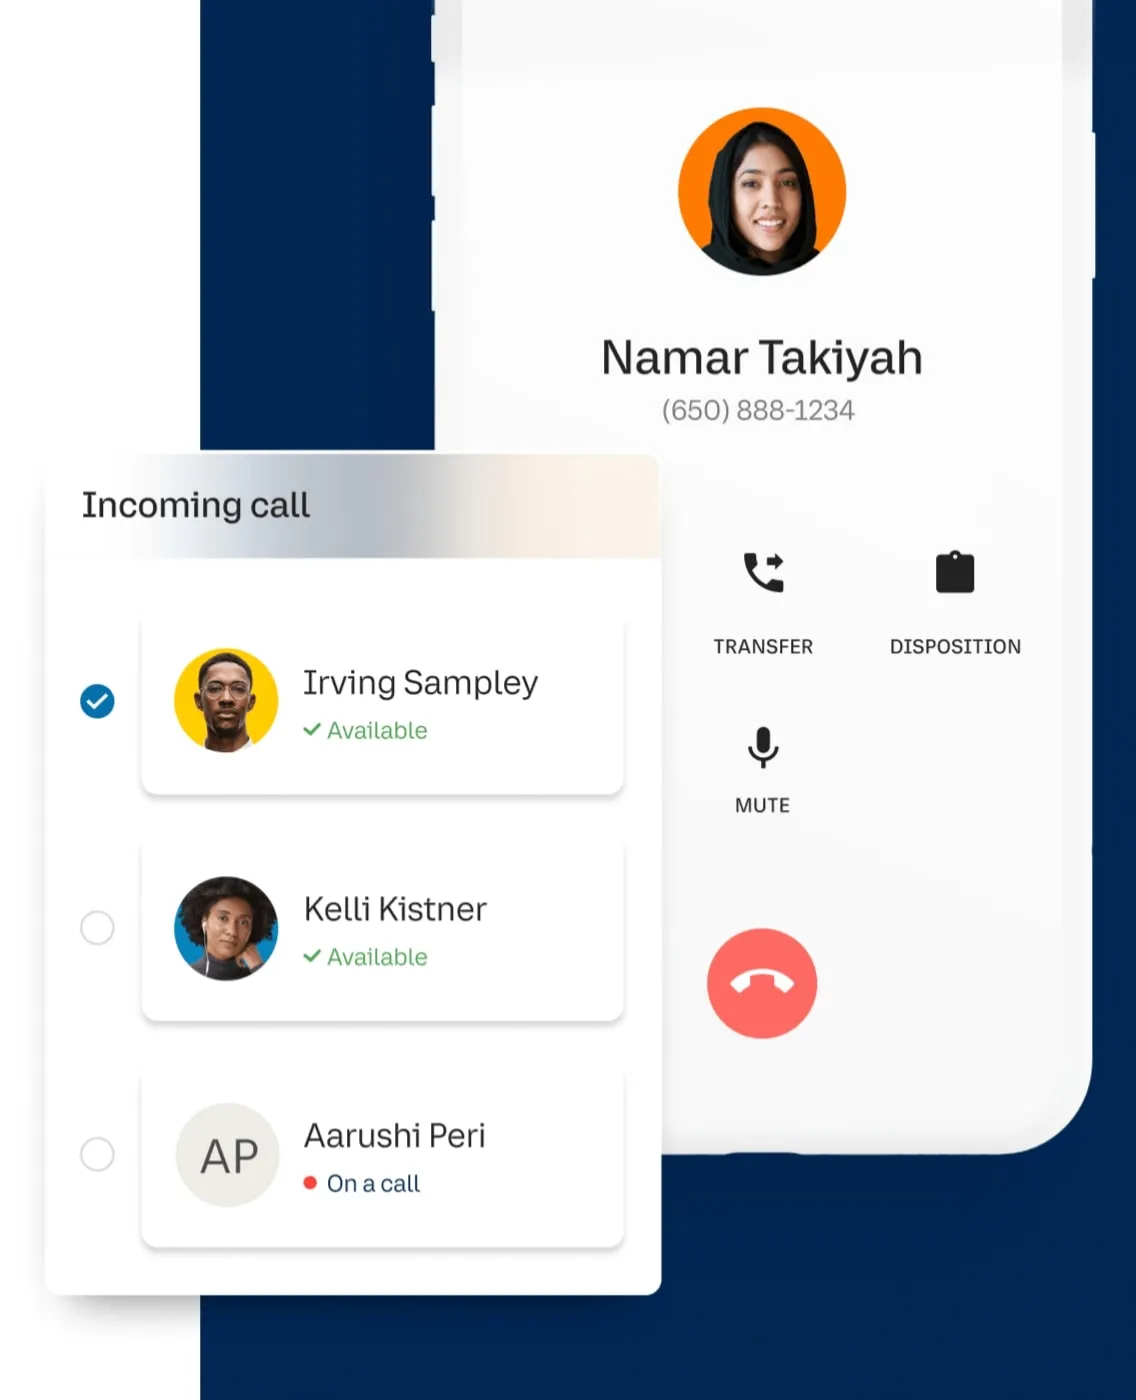 Customer contact center agents receiving inbound calls in different platforms through omnichannel routing